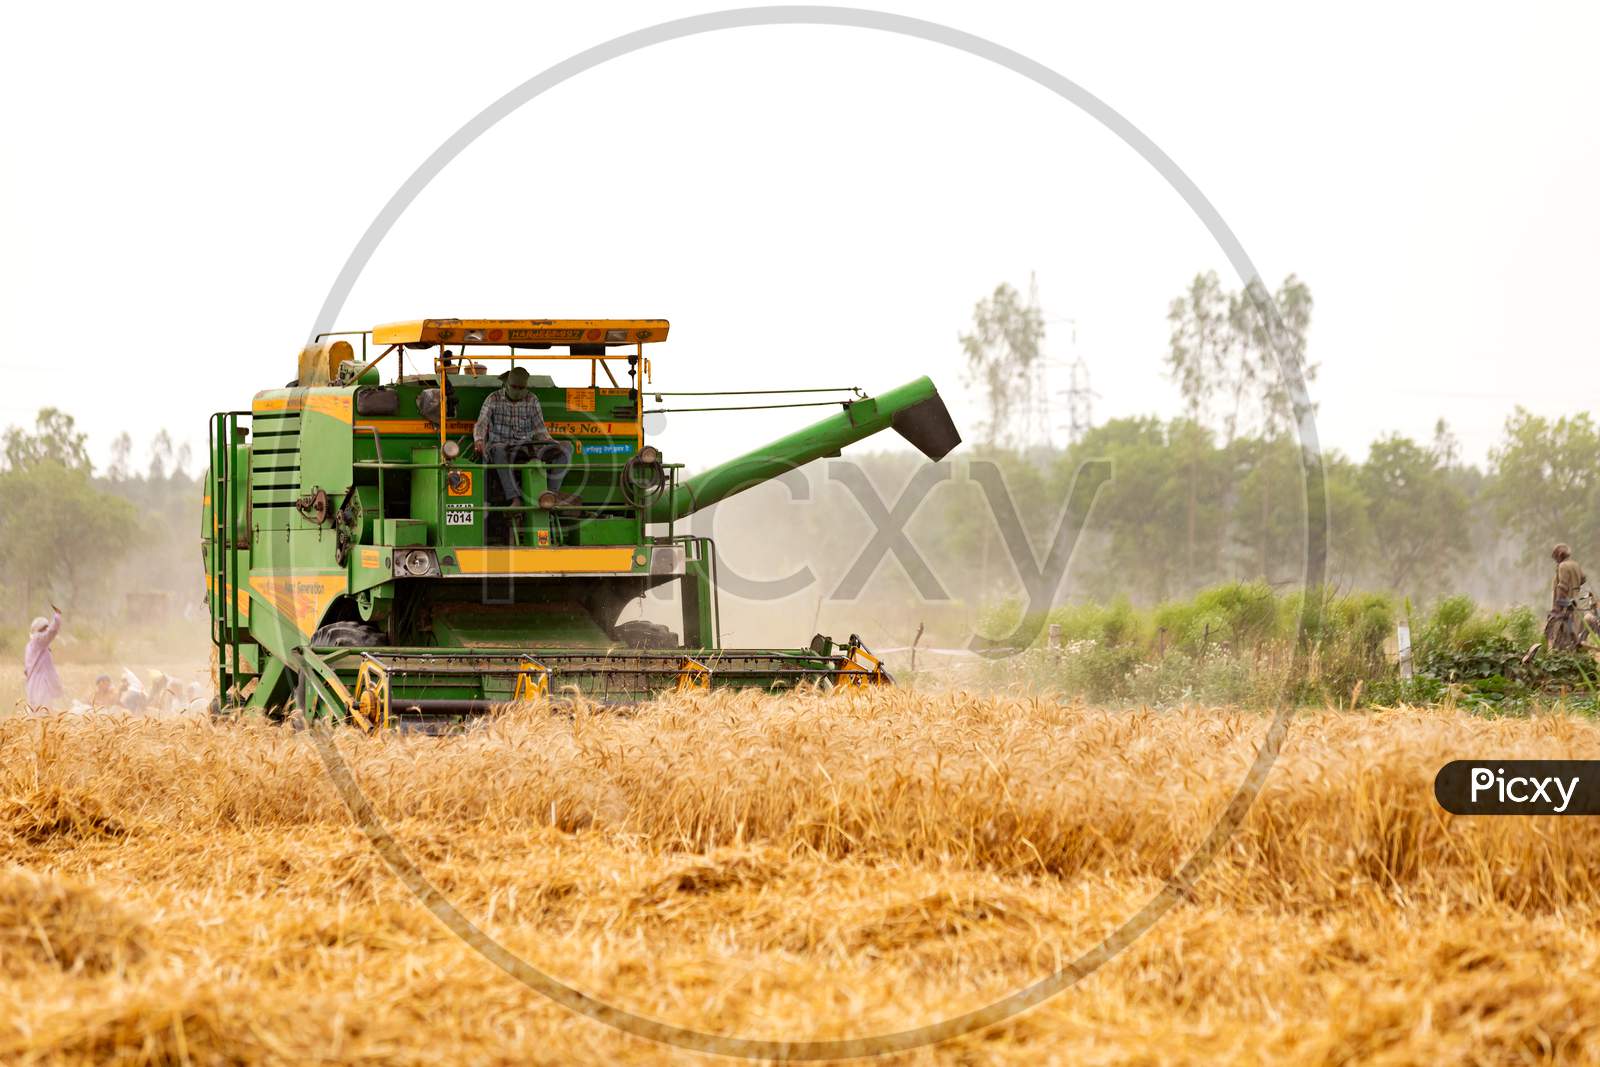 Man Drives Plowing Harvesting Machine On A Big Field Of Wheat Crop, Combine Harvester, Modern Indian Farming Technology, Agriculture Industry.